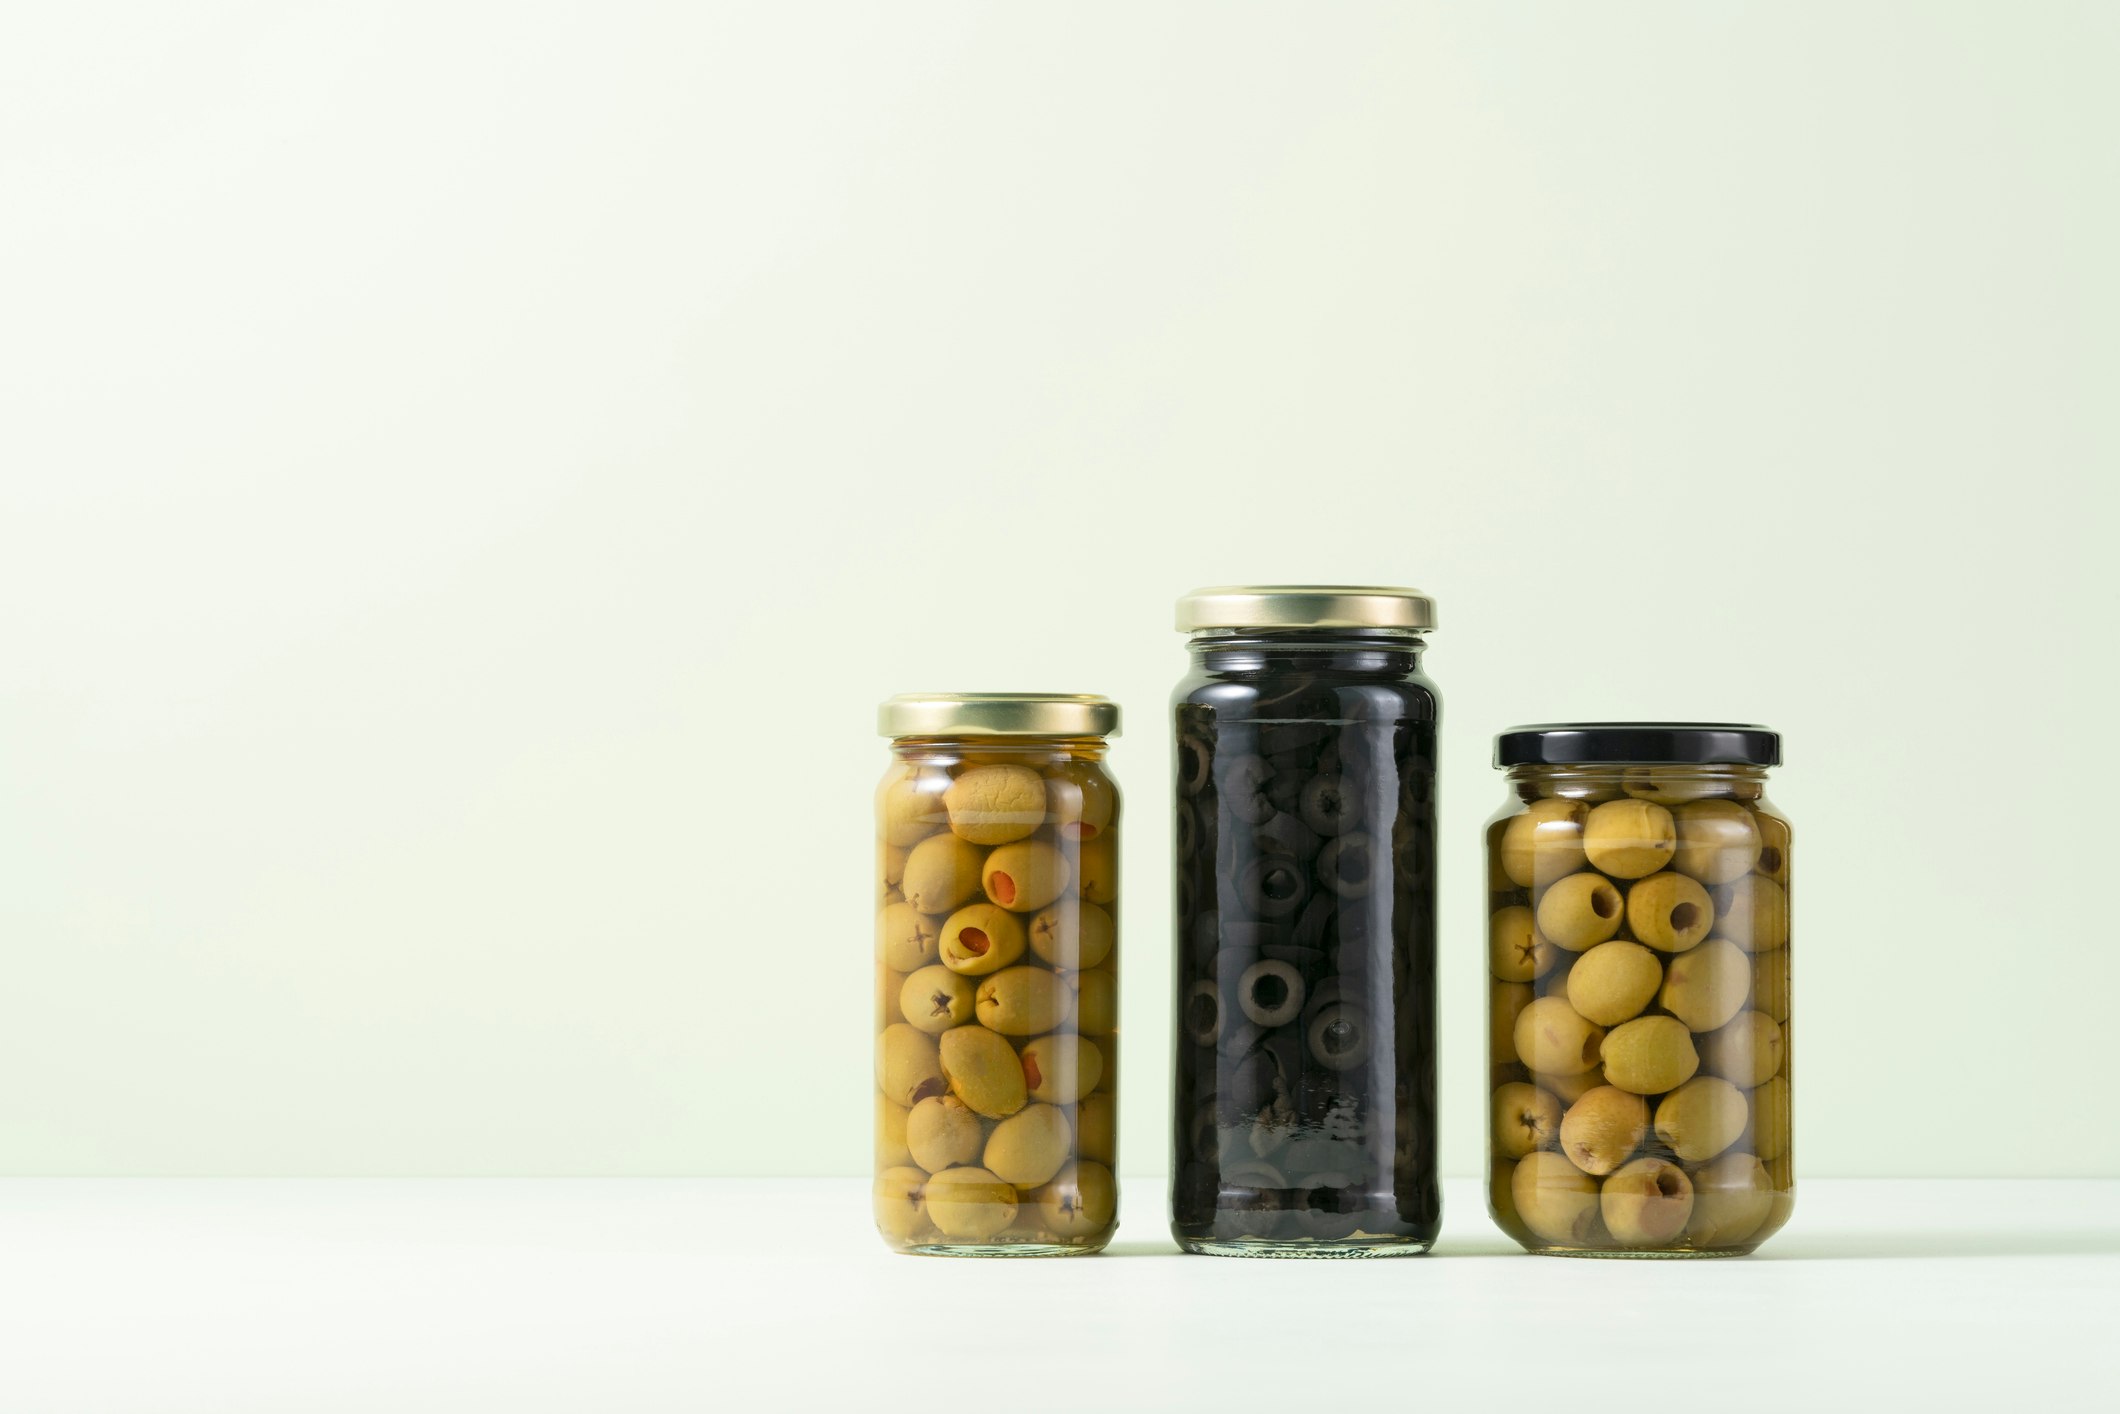 A Variety of Olives Sealed and Preserved in Glass Jars